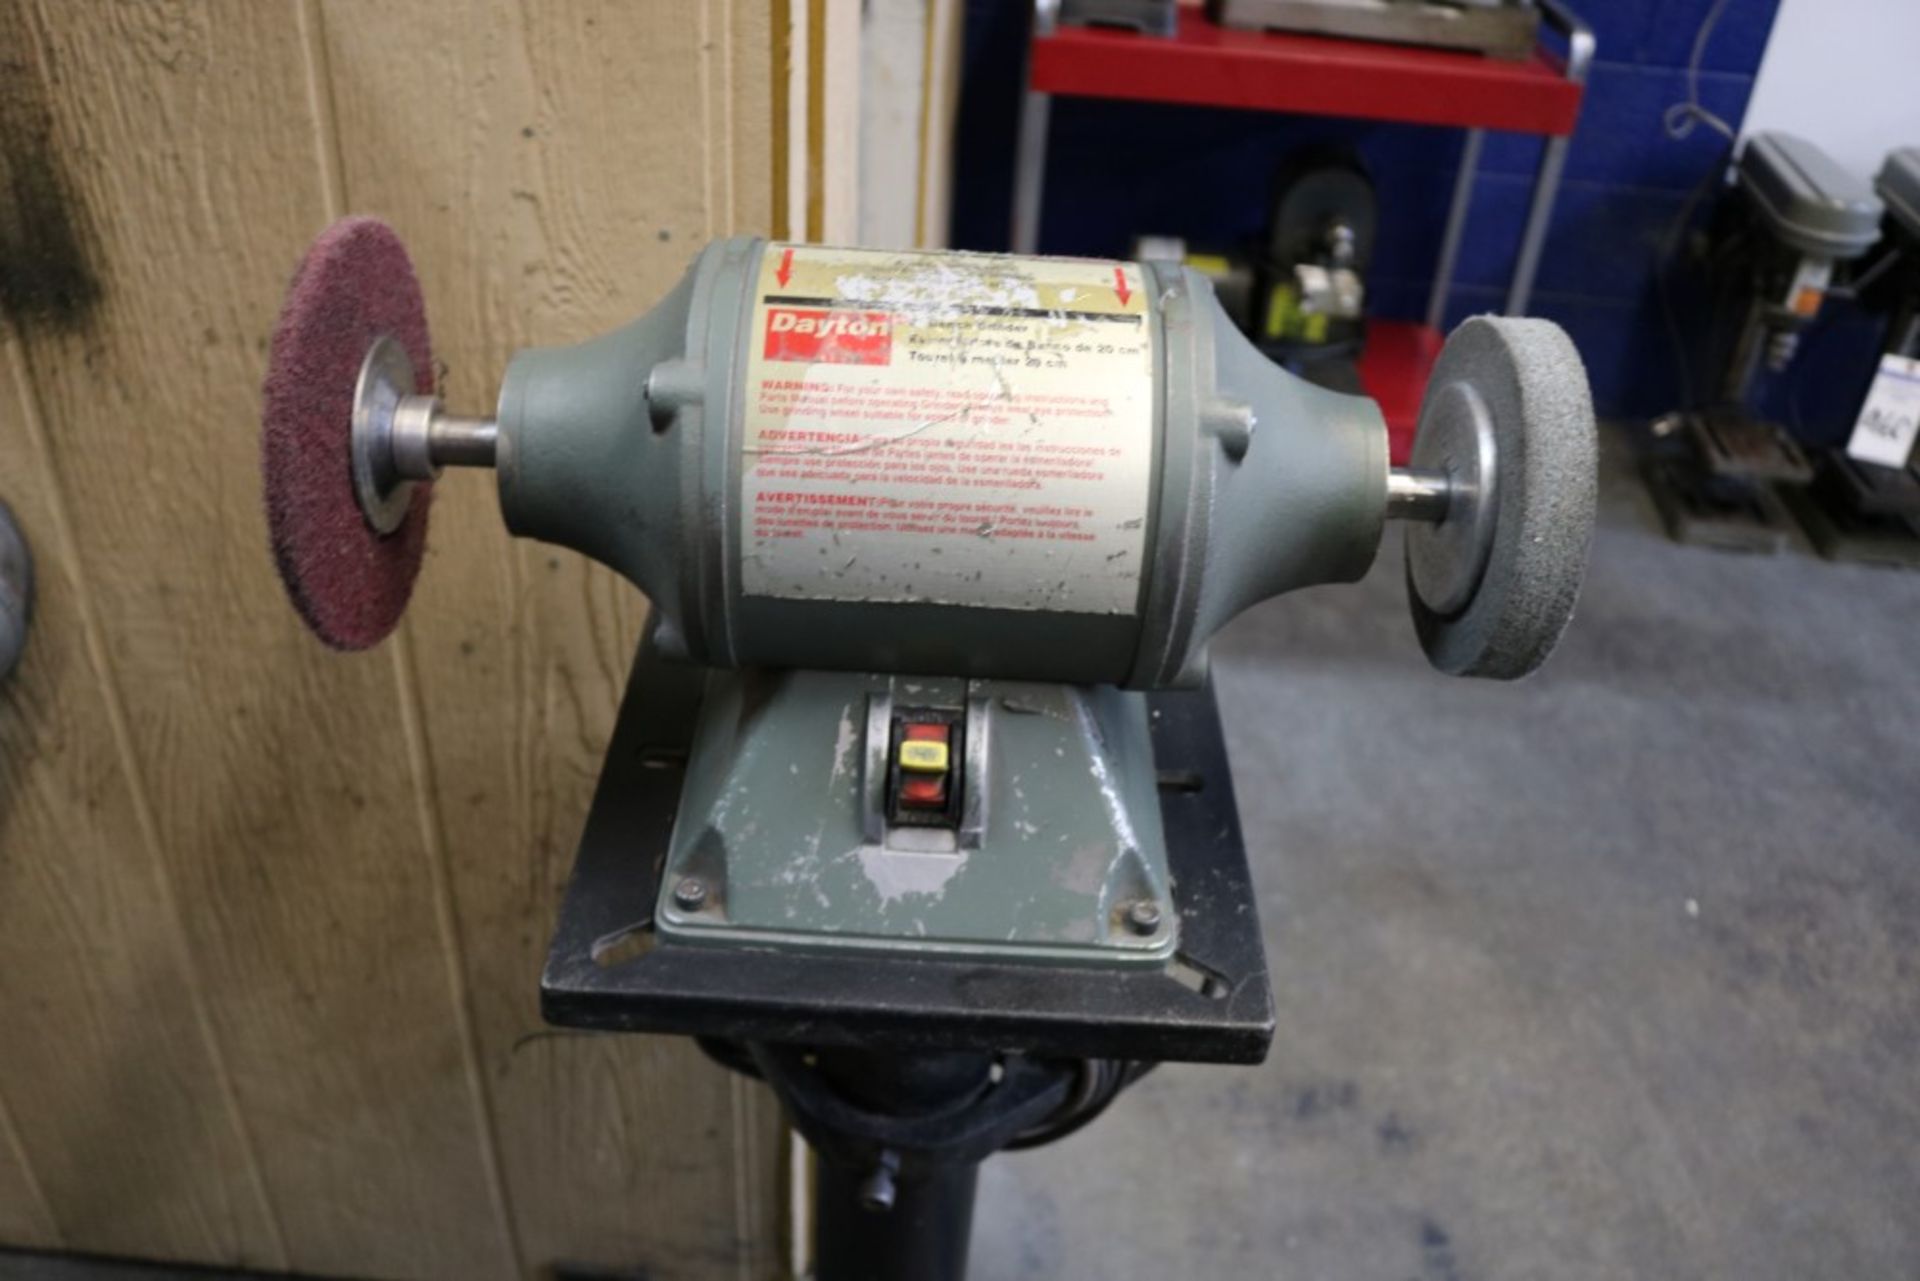 Dayton 8" Bench Grinder/Polisher on Stand with Various Grinding Wheels, Wire Brush Wheels and - Image 2 of 6